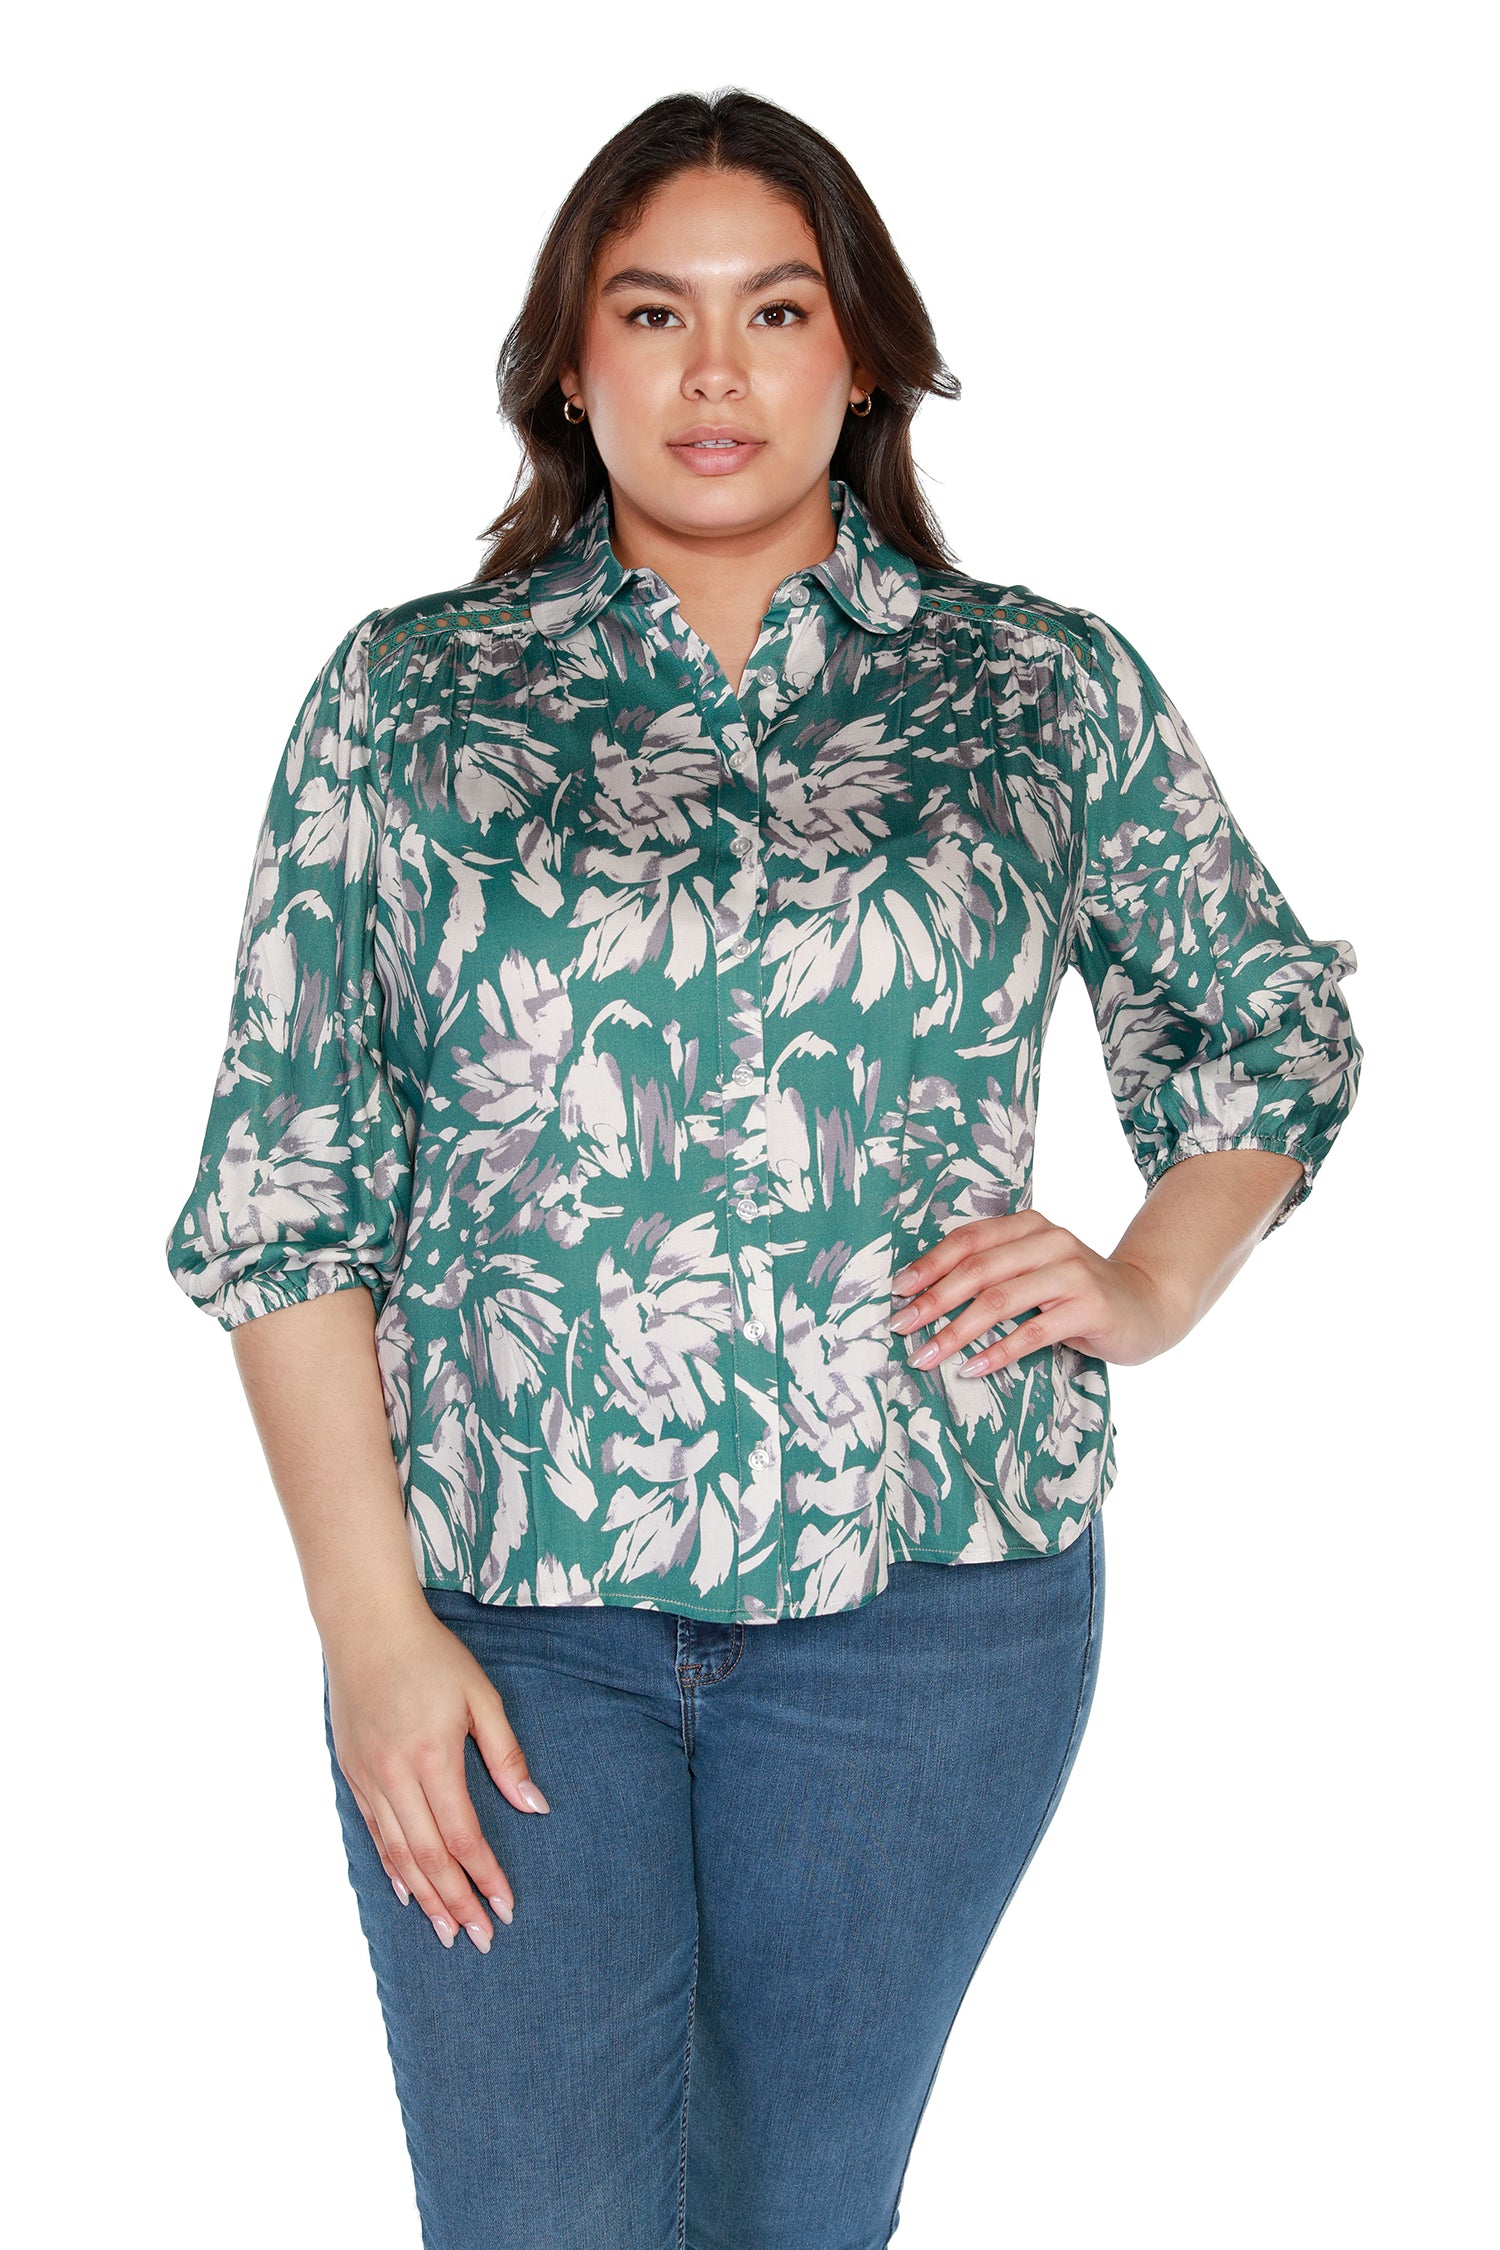 Women’s Floral Button Up Blouse with Collar and 3/4 Sleeves | Curvy